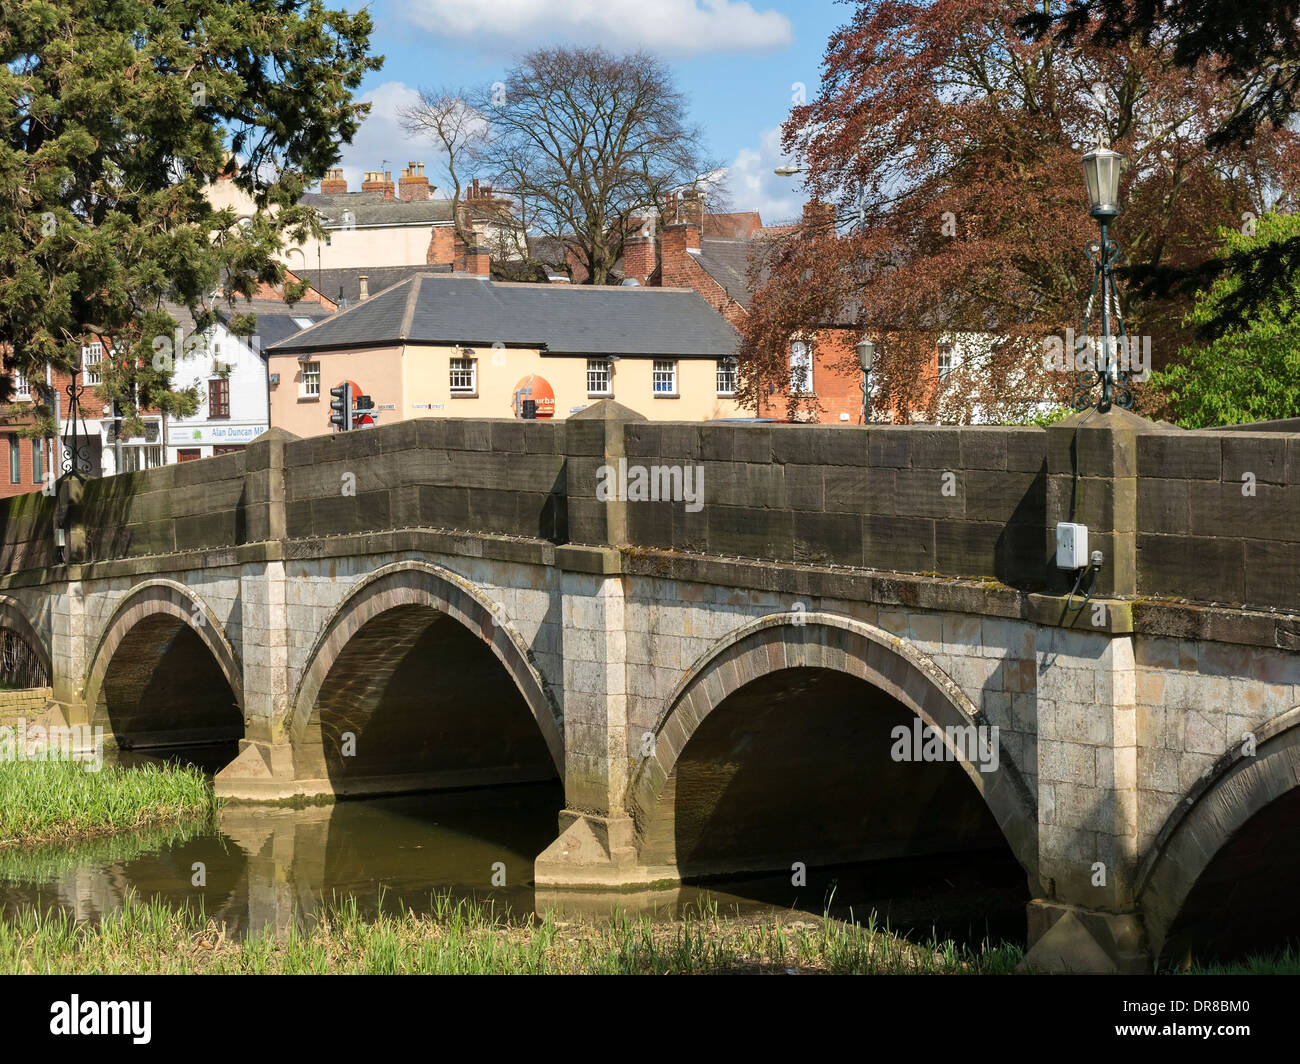 The stone arches of Lady Wilton bridge, over the River Eye with town centre buildings beyond, Melton Mowbray, Leicestershire, England, UK. Stock Photo